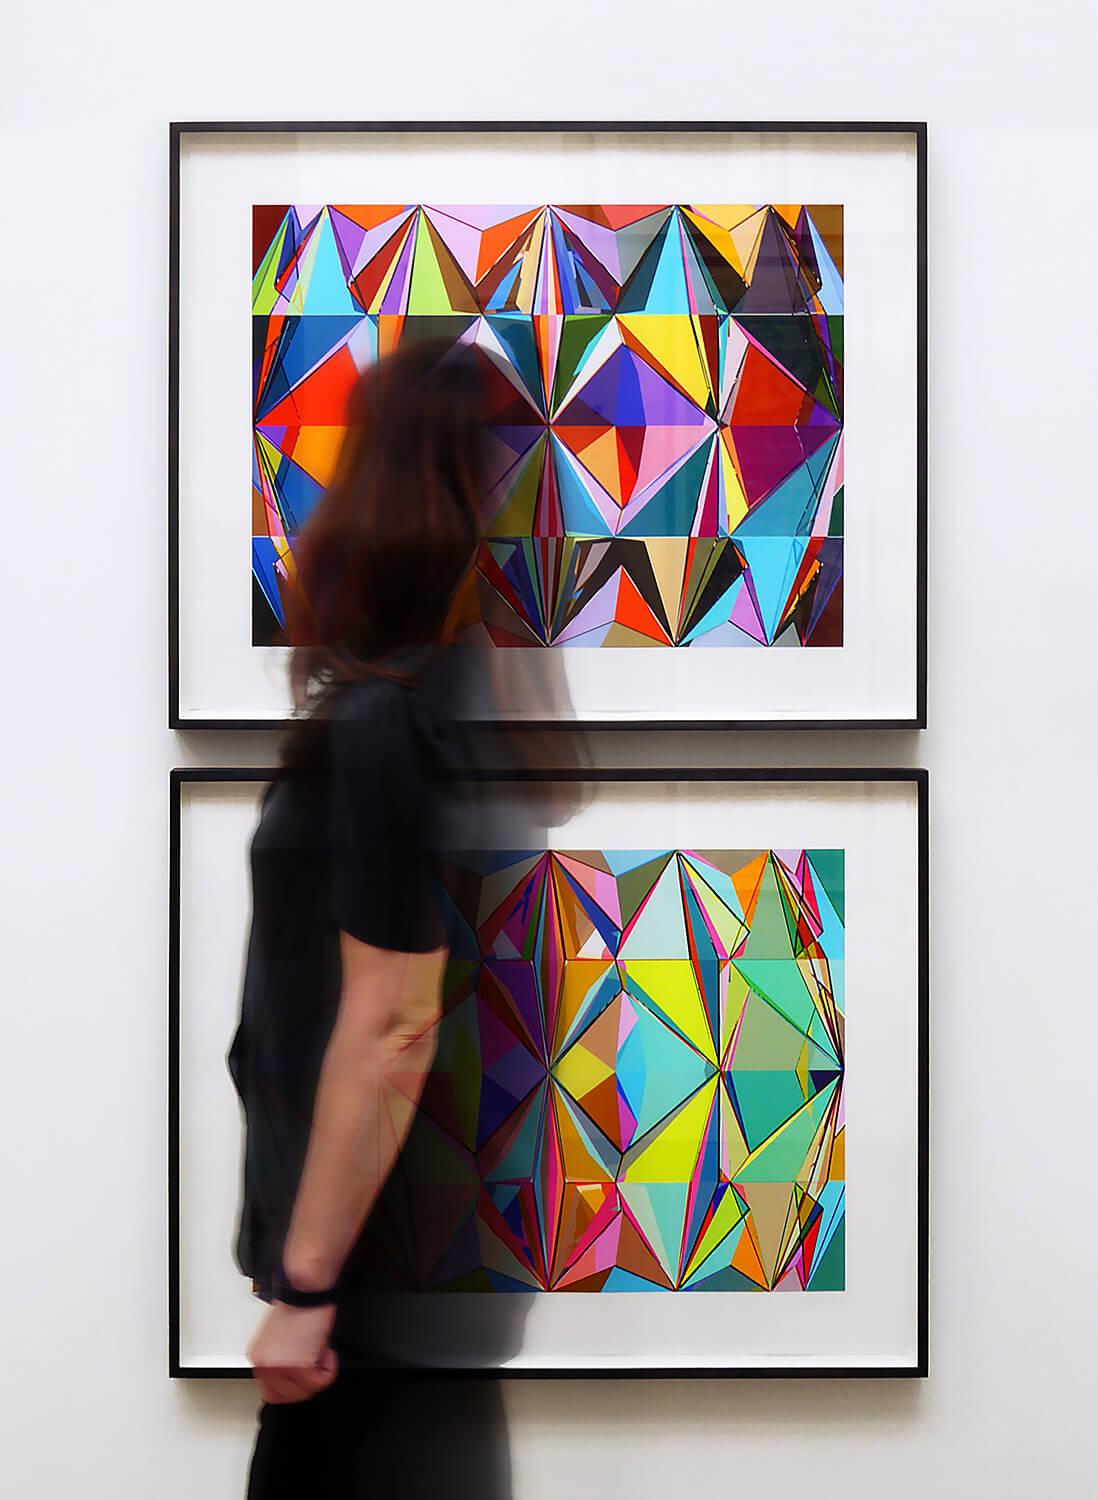 Klint / reDux / chrm is a ten colour archival pigment print on 305gsm, 100% cotton, Hahnemühle fine art paper.

The work can be supplied unframed, or framed and ready to hang. I tend to use fairly minimal glazed and painted tulipwood frames, and set